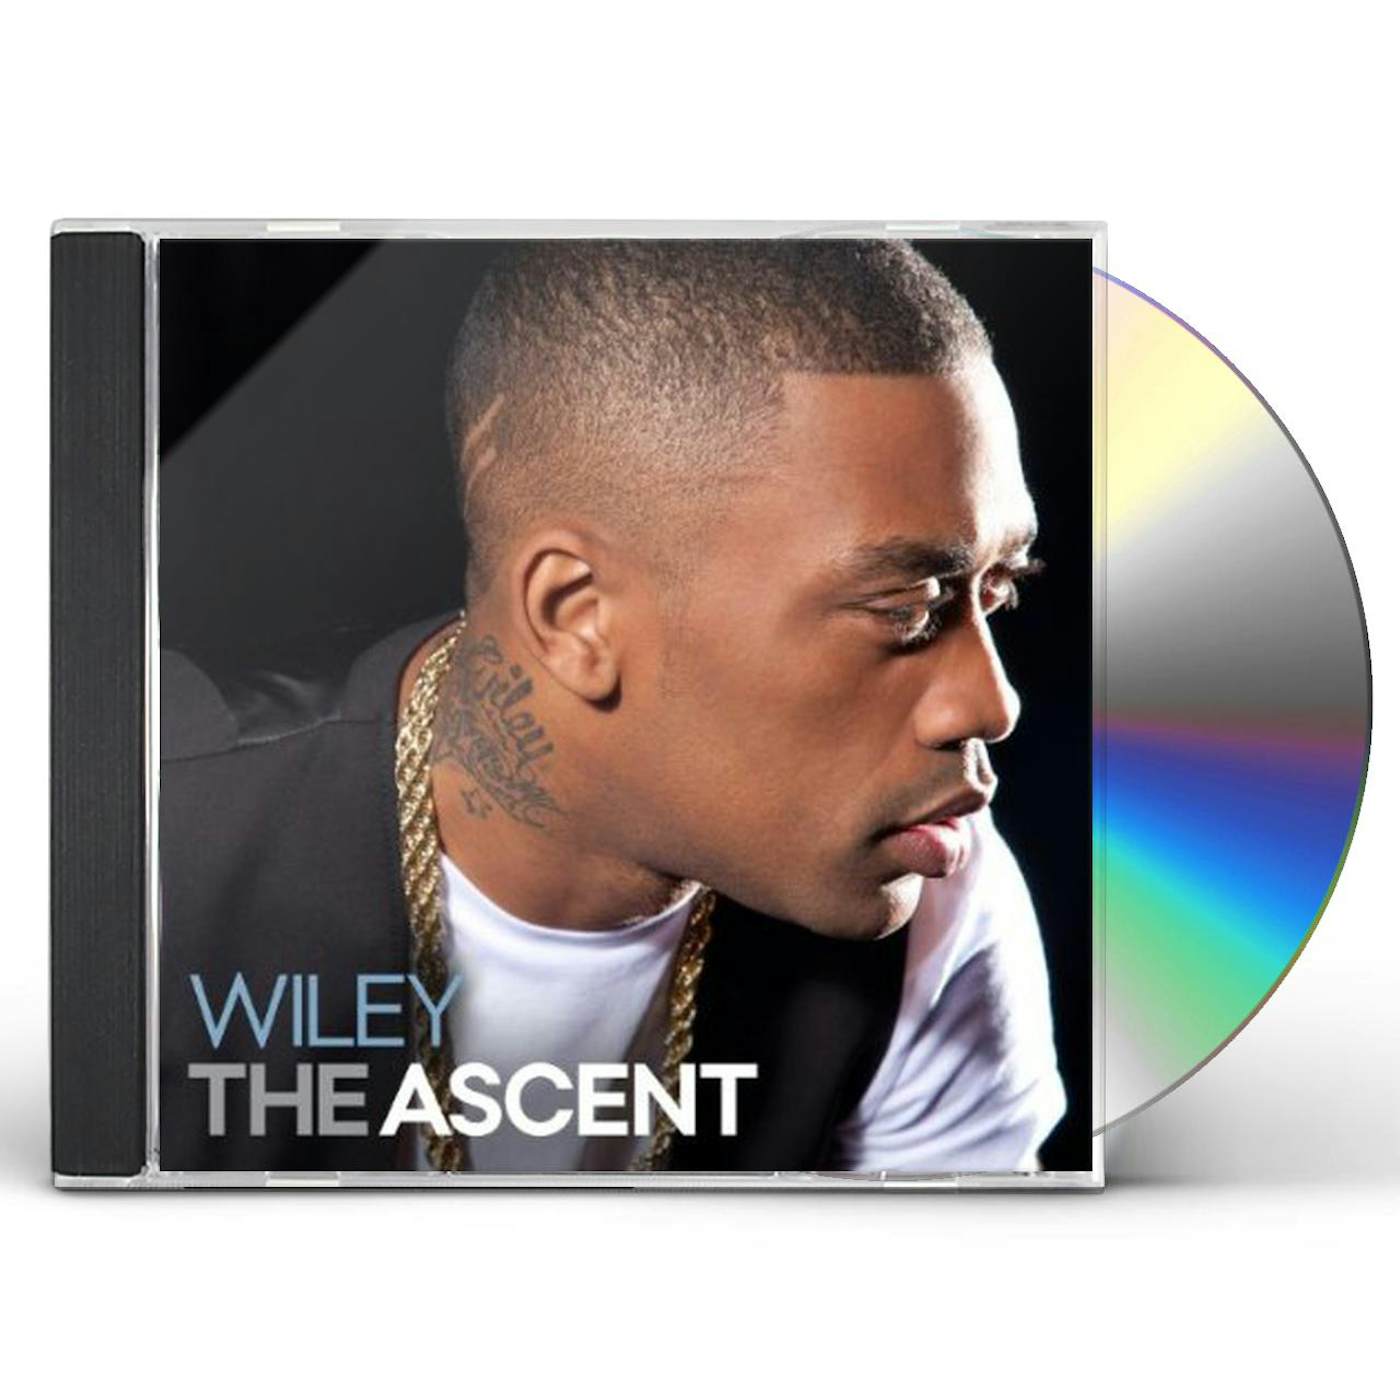 Wiley ASCENT CD